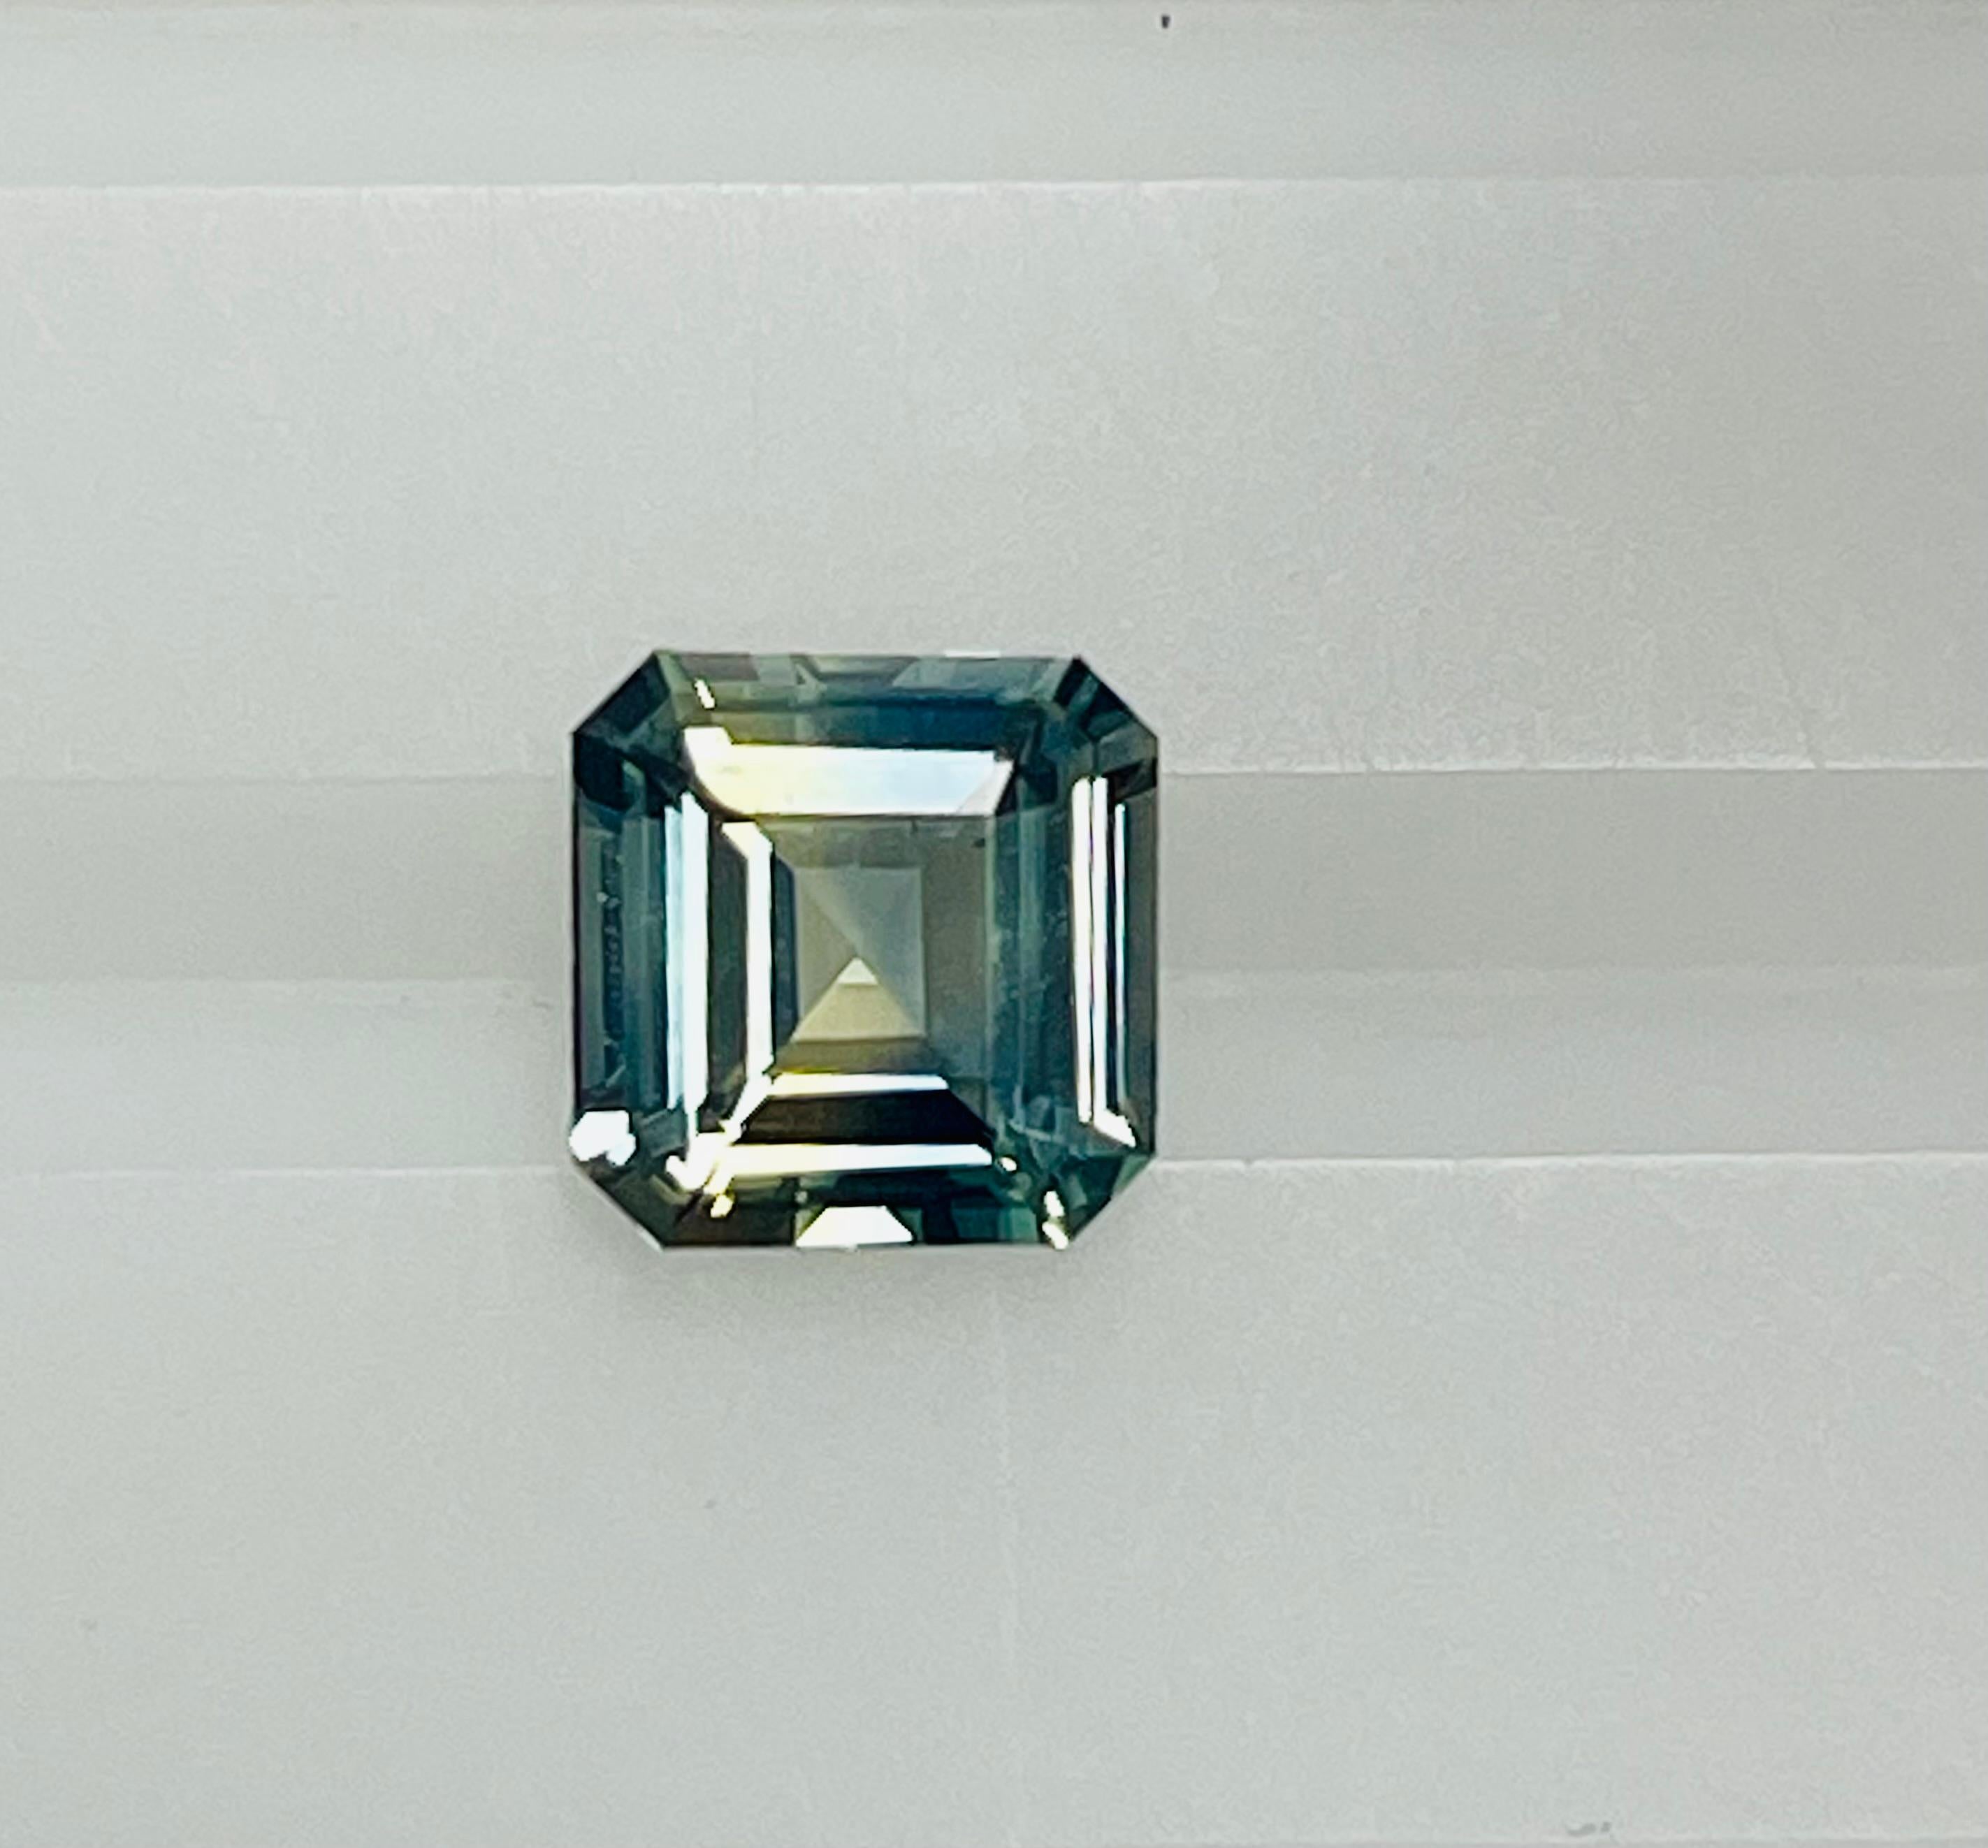 This 2.05 Ct square cut exhibits great mixes of colors of blue and green and yellow in a great cutting , shape and brightness and this mix of colors and clarity and size makes this a highly unusual sapphire in great quality.